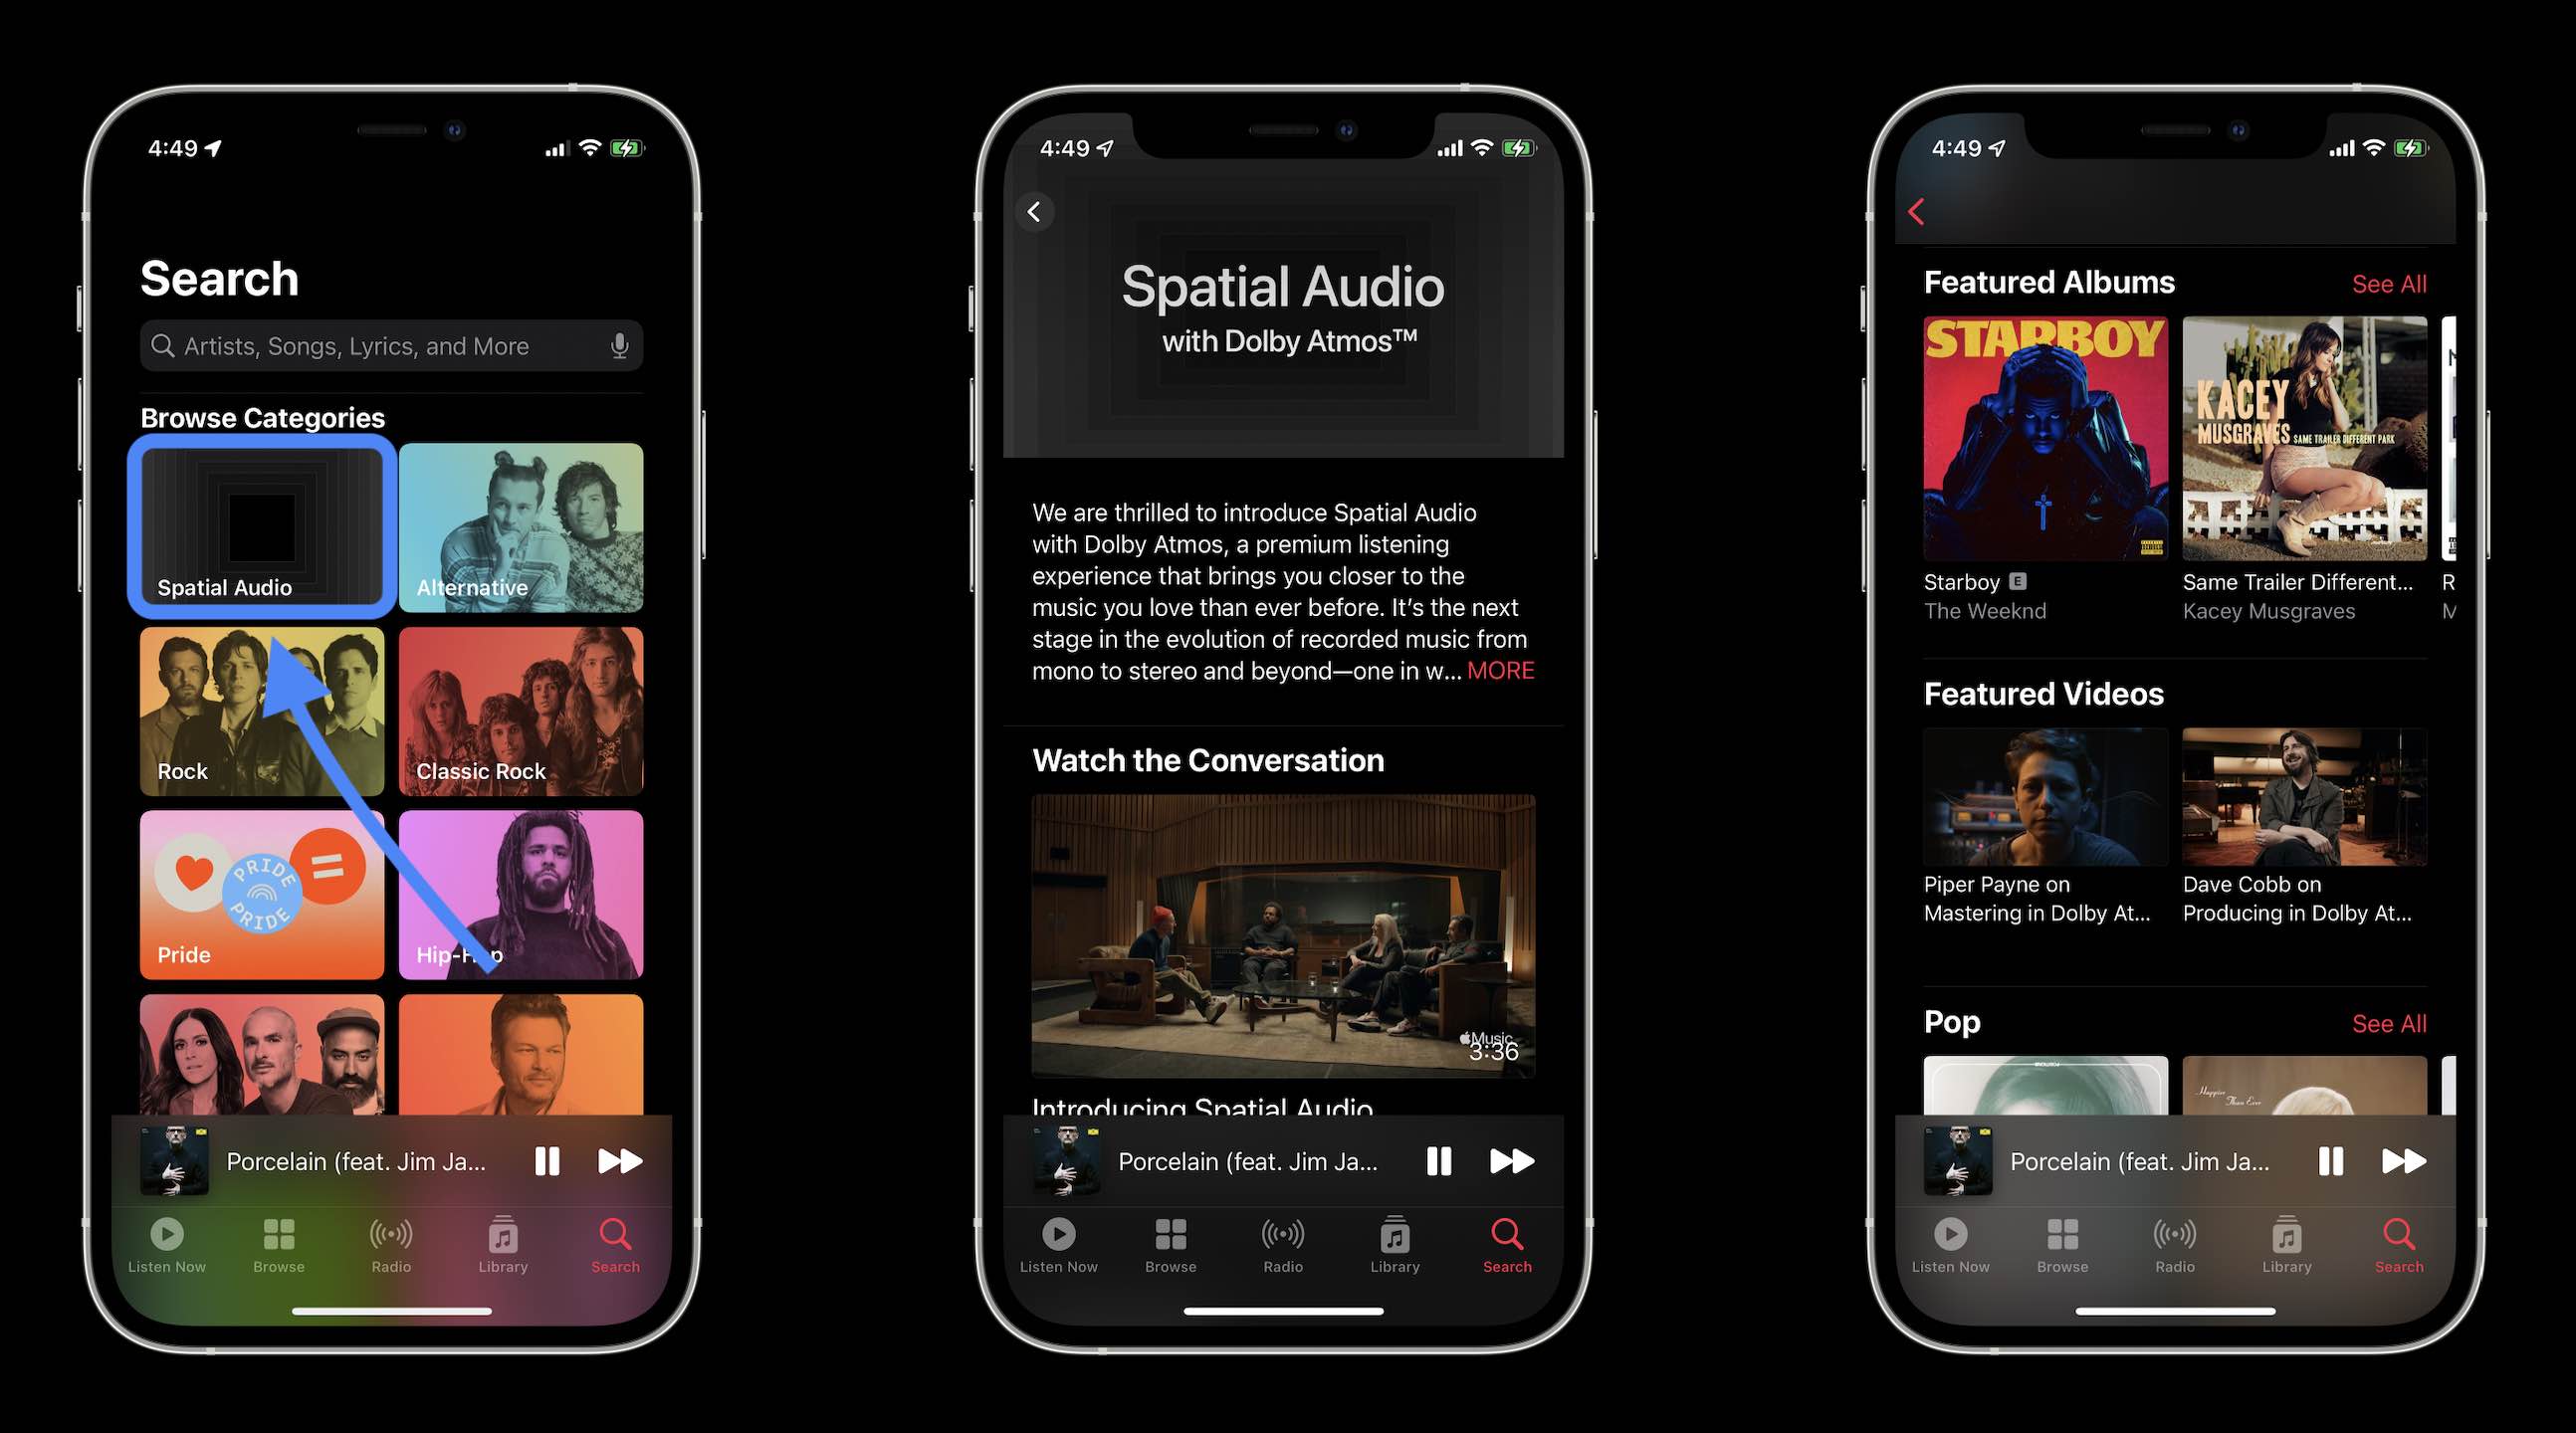 6 classic rock tracks you need to hear in Dolby Atmos on Apple